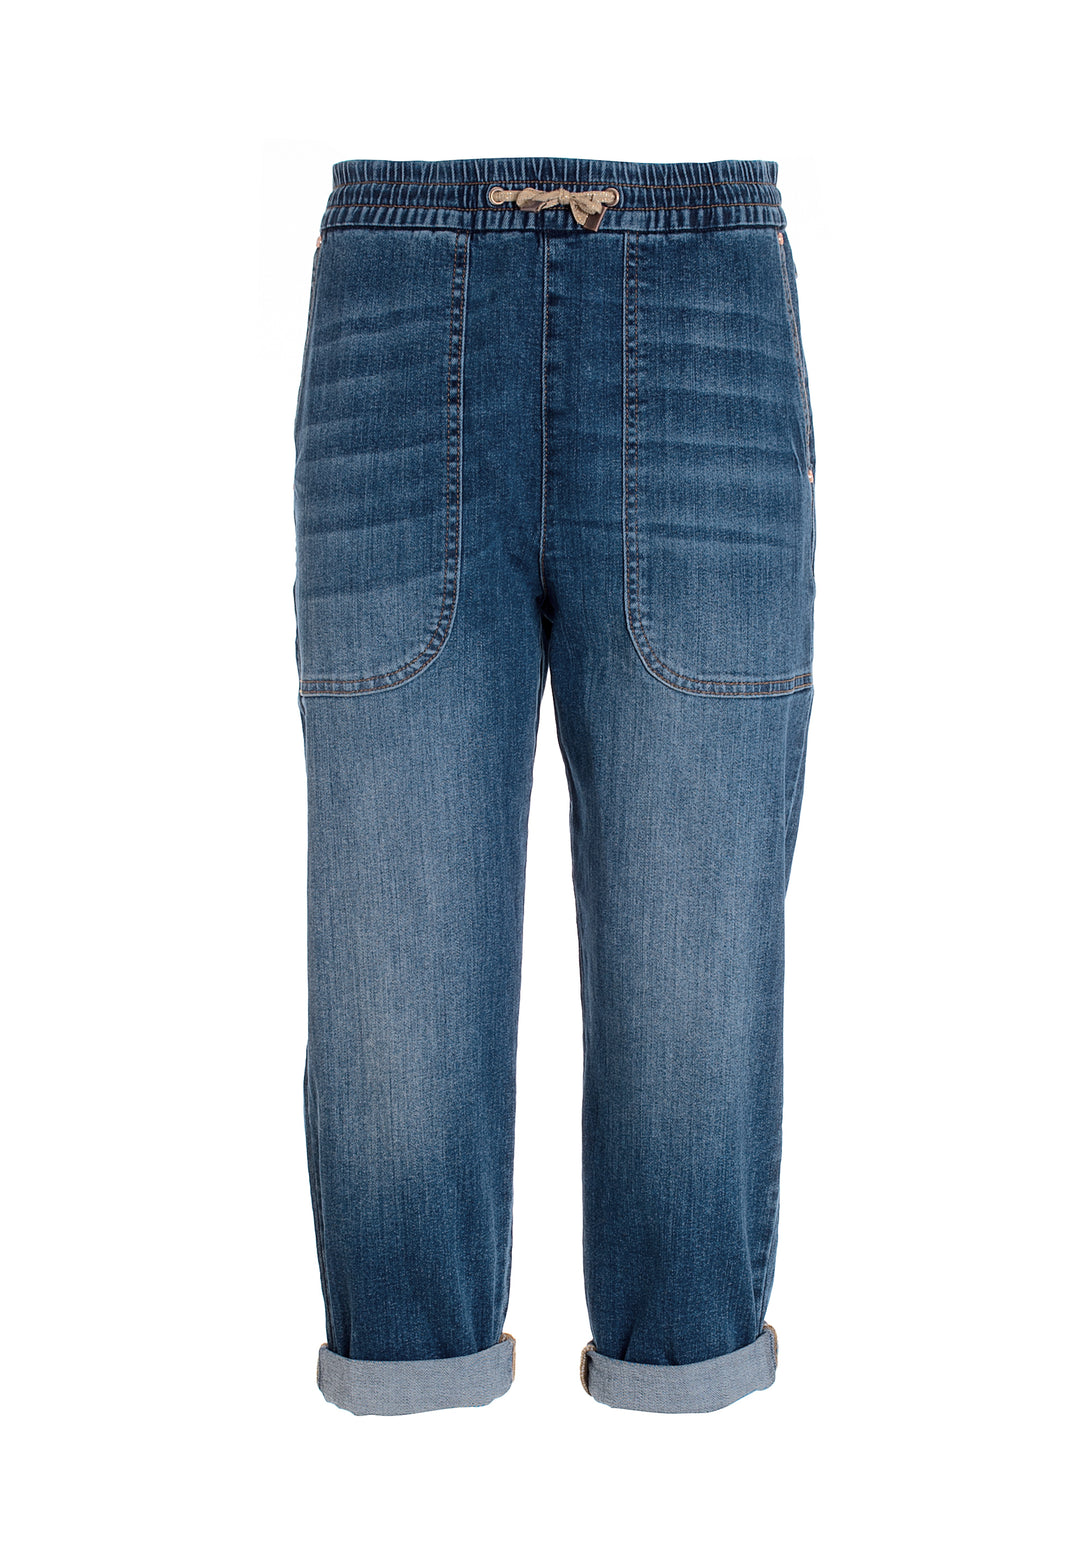 Jeans straight leg made in denim with middle wash